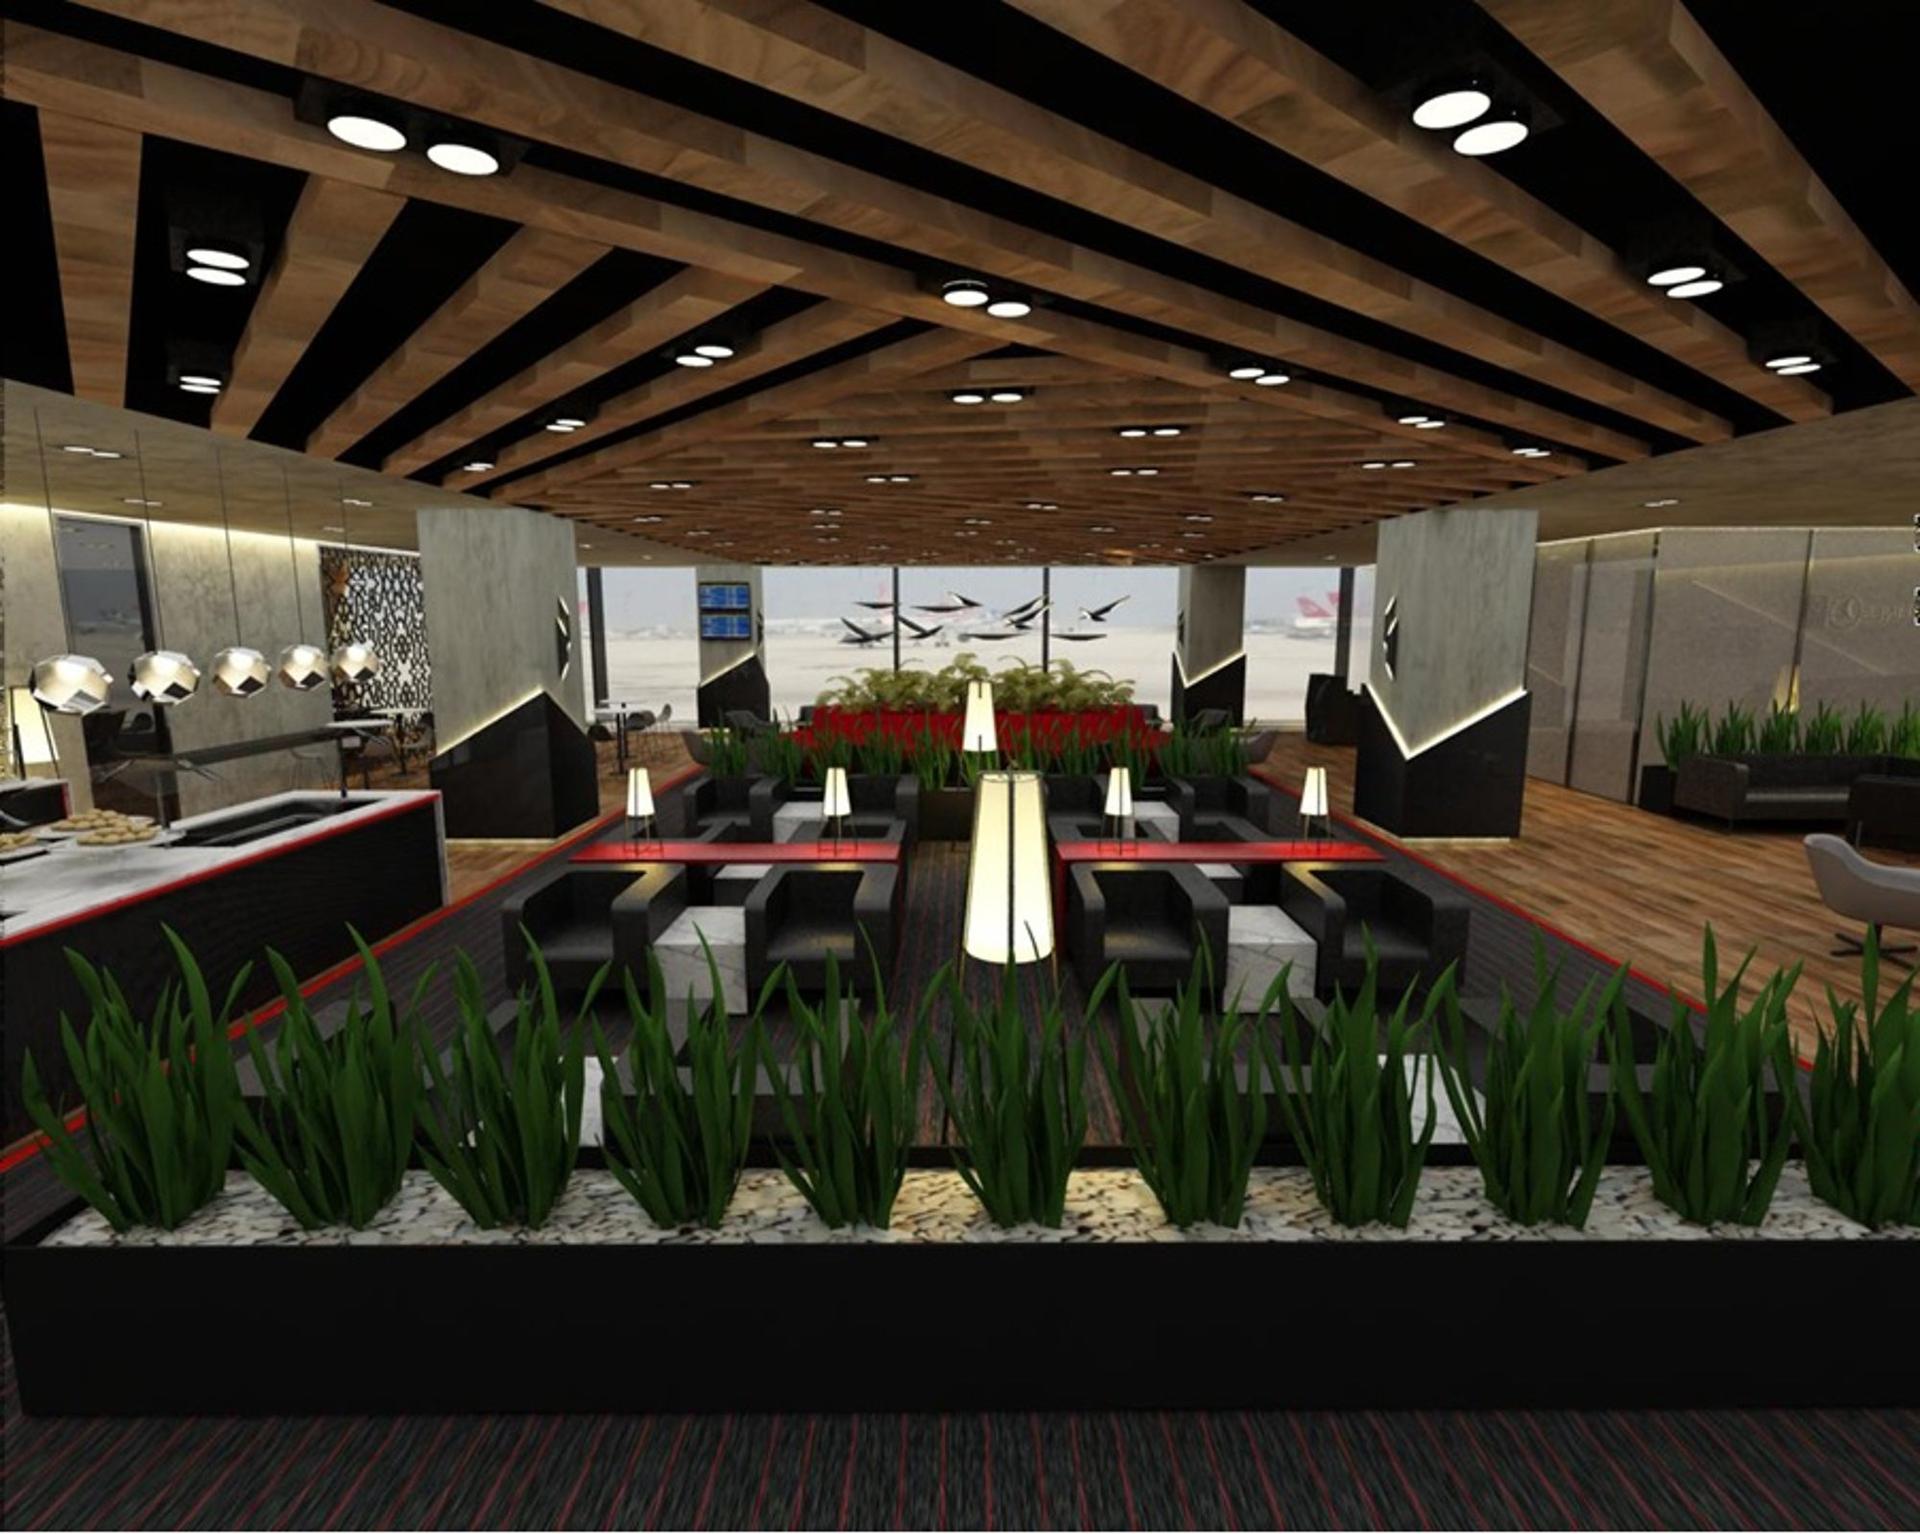 Turkish Airlines CIP Lounge (Business Lounge) image 13 of 27